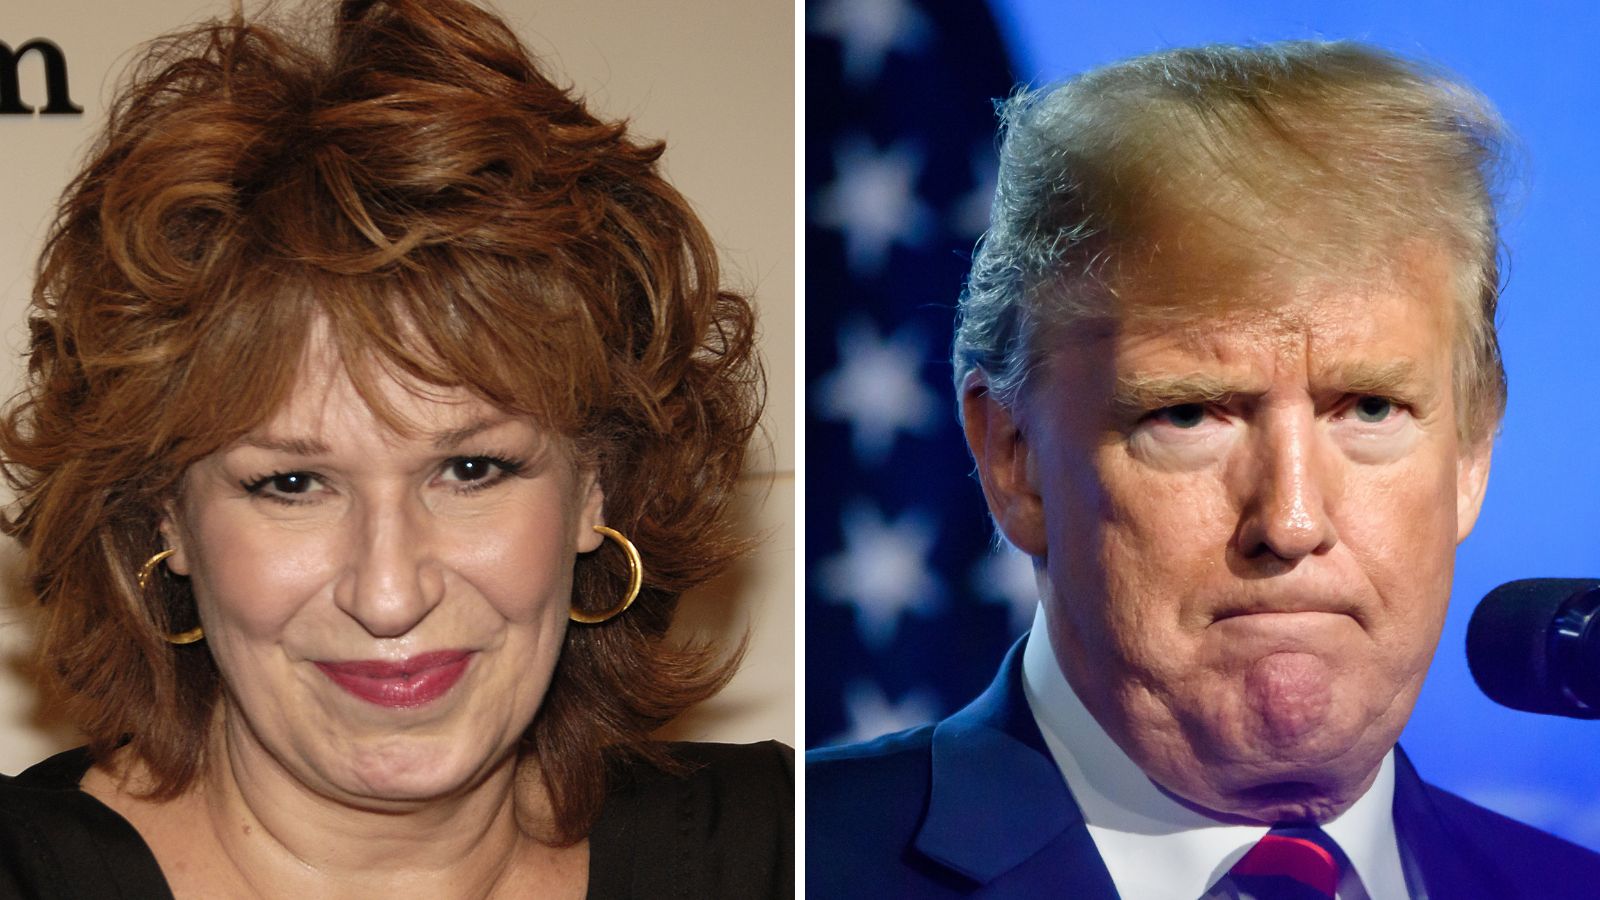 “Donald Trump Is Running for President To Stay Out of Jail”: Joy Behar Blasts Trump After Prosecution Revenge Comments